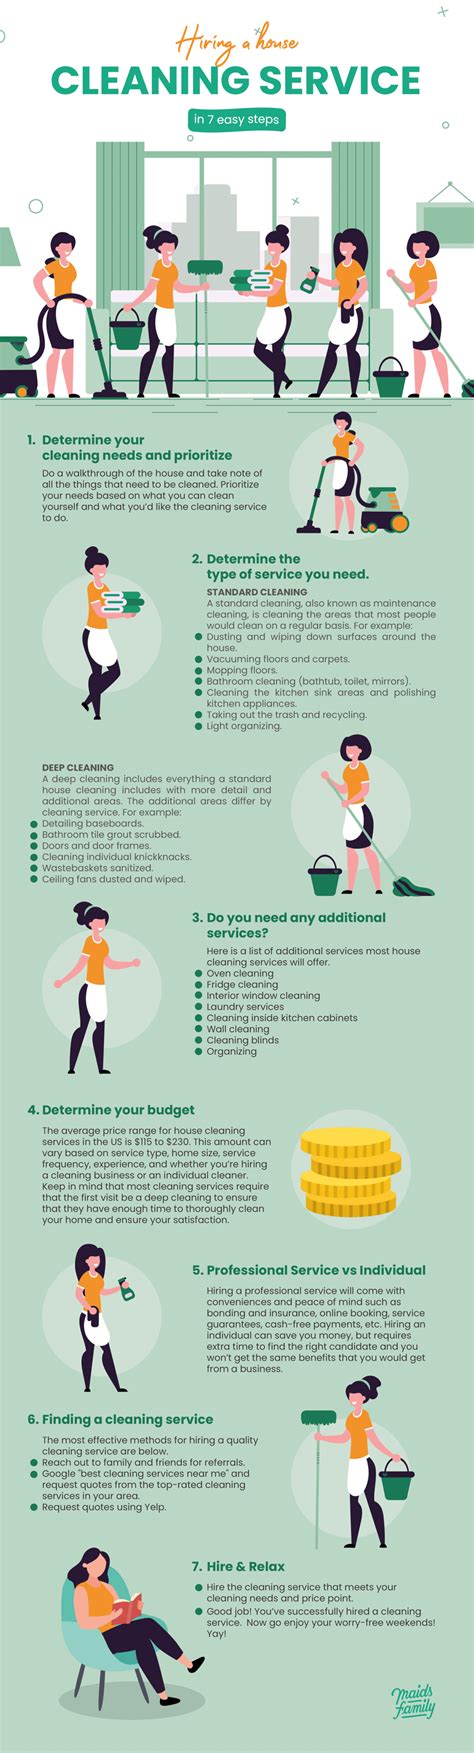 Hiring A House Cleaning Service In 7 Easy Steps Infographic